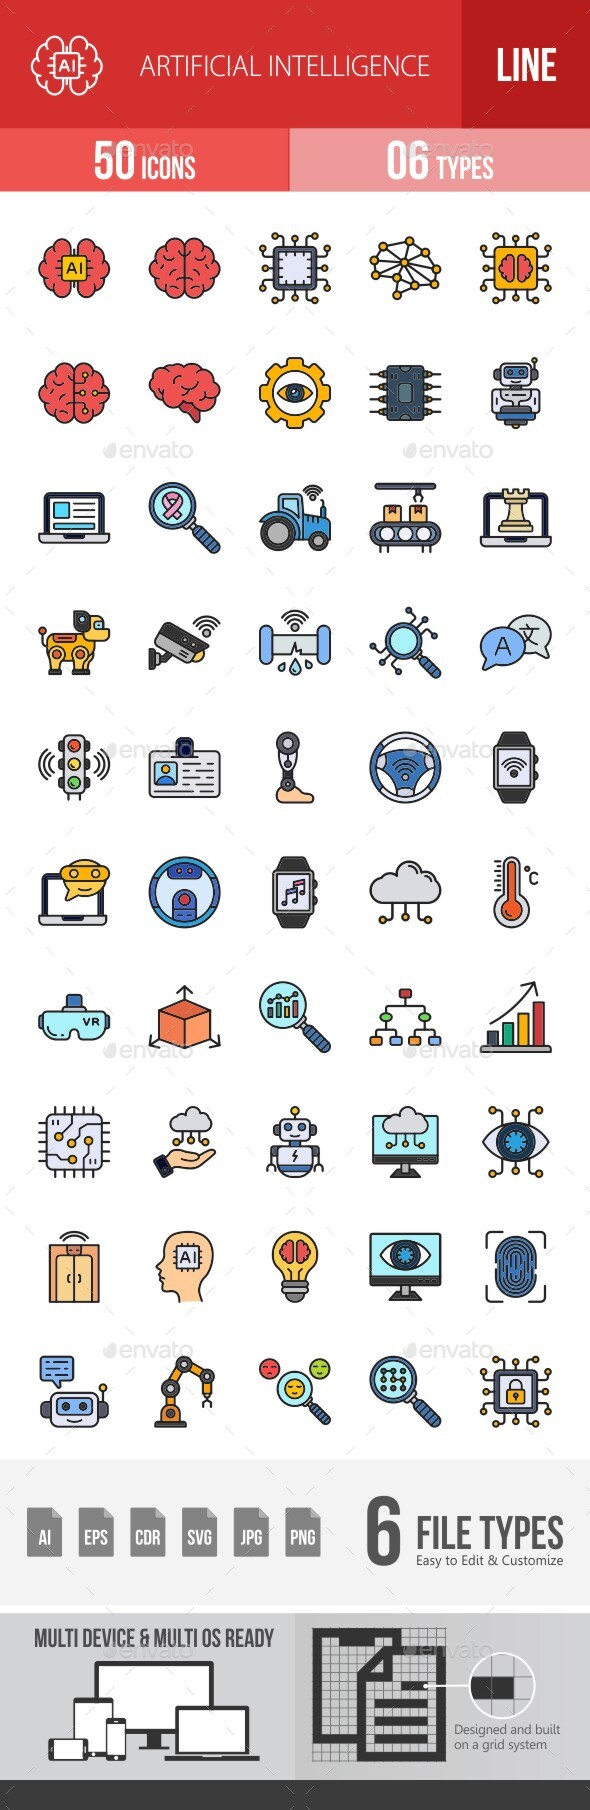 [DOWNLOAD]Artificial Intelligence Filled Line Icons